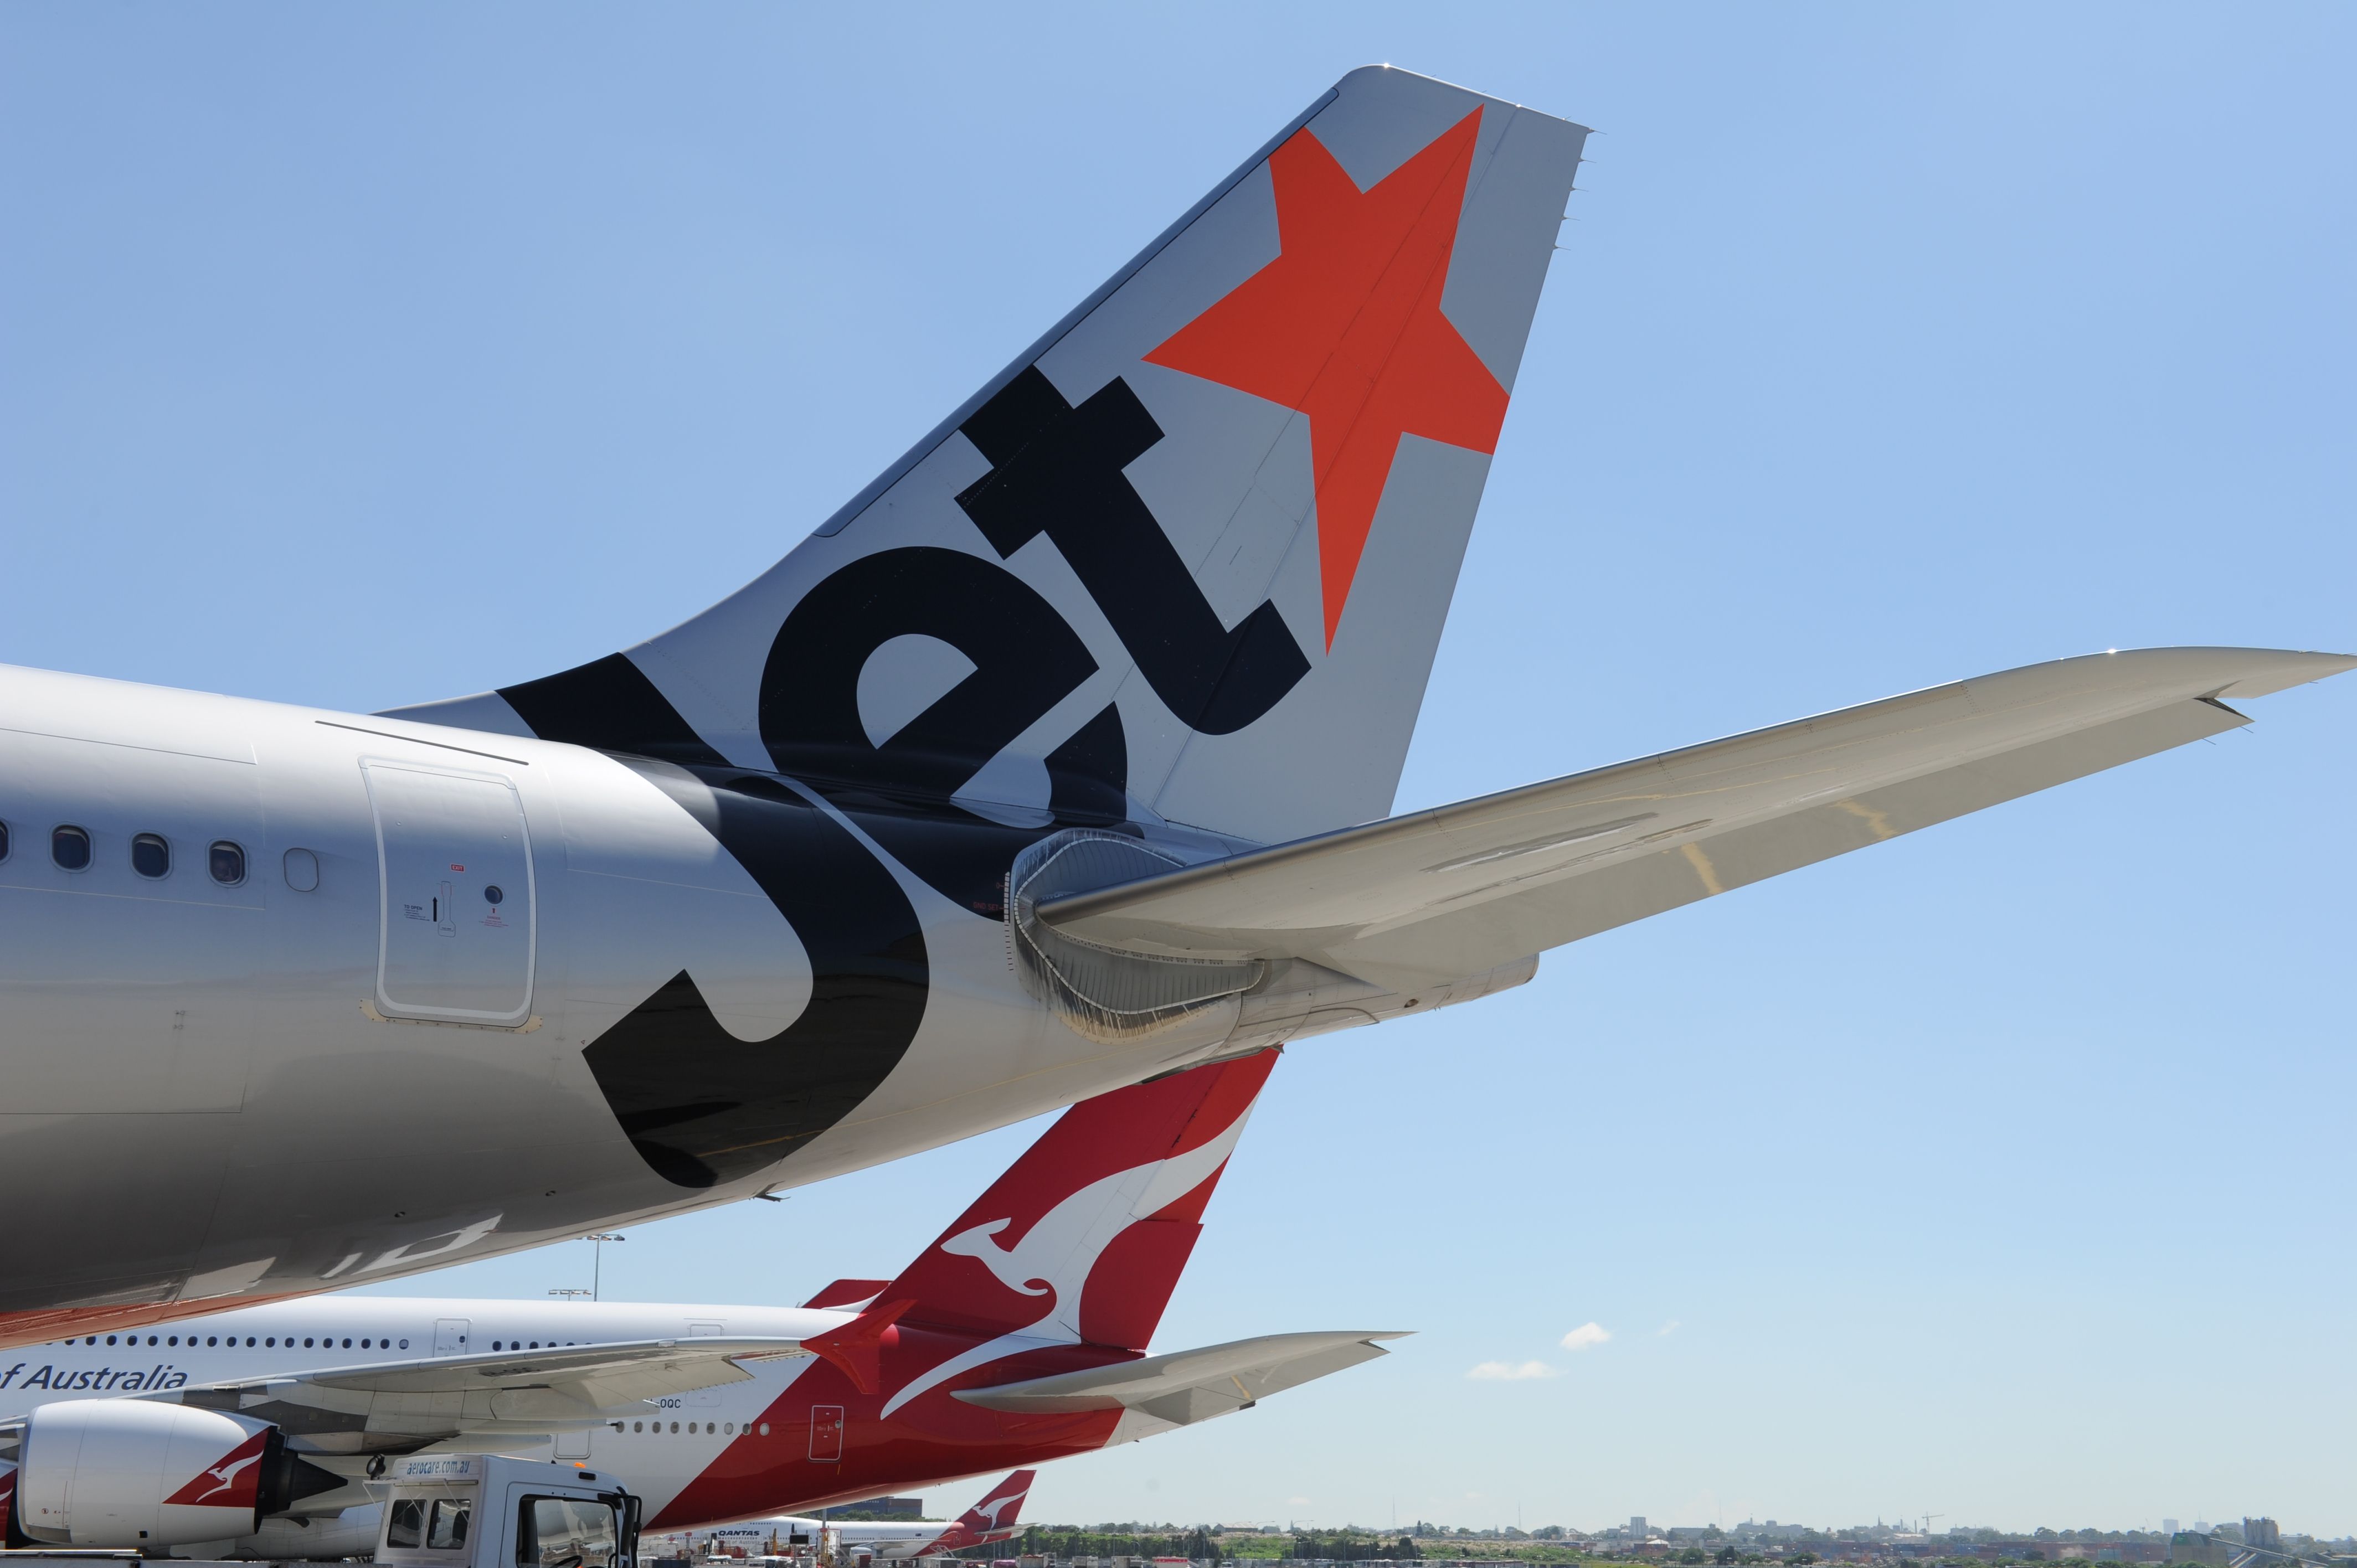 Qantas and Jetstar plan to operate during the strike period